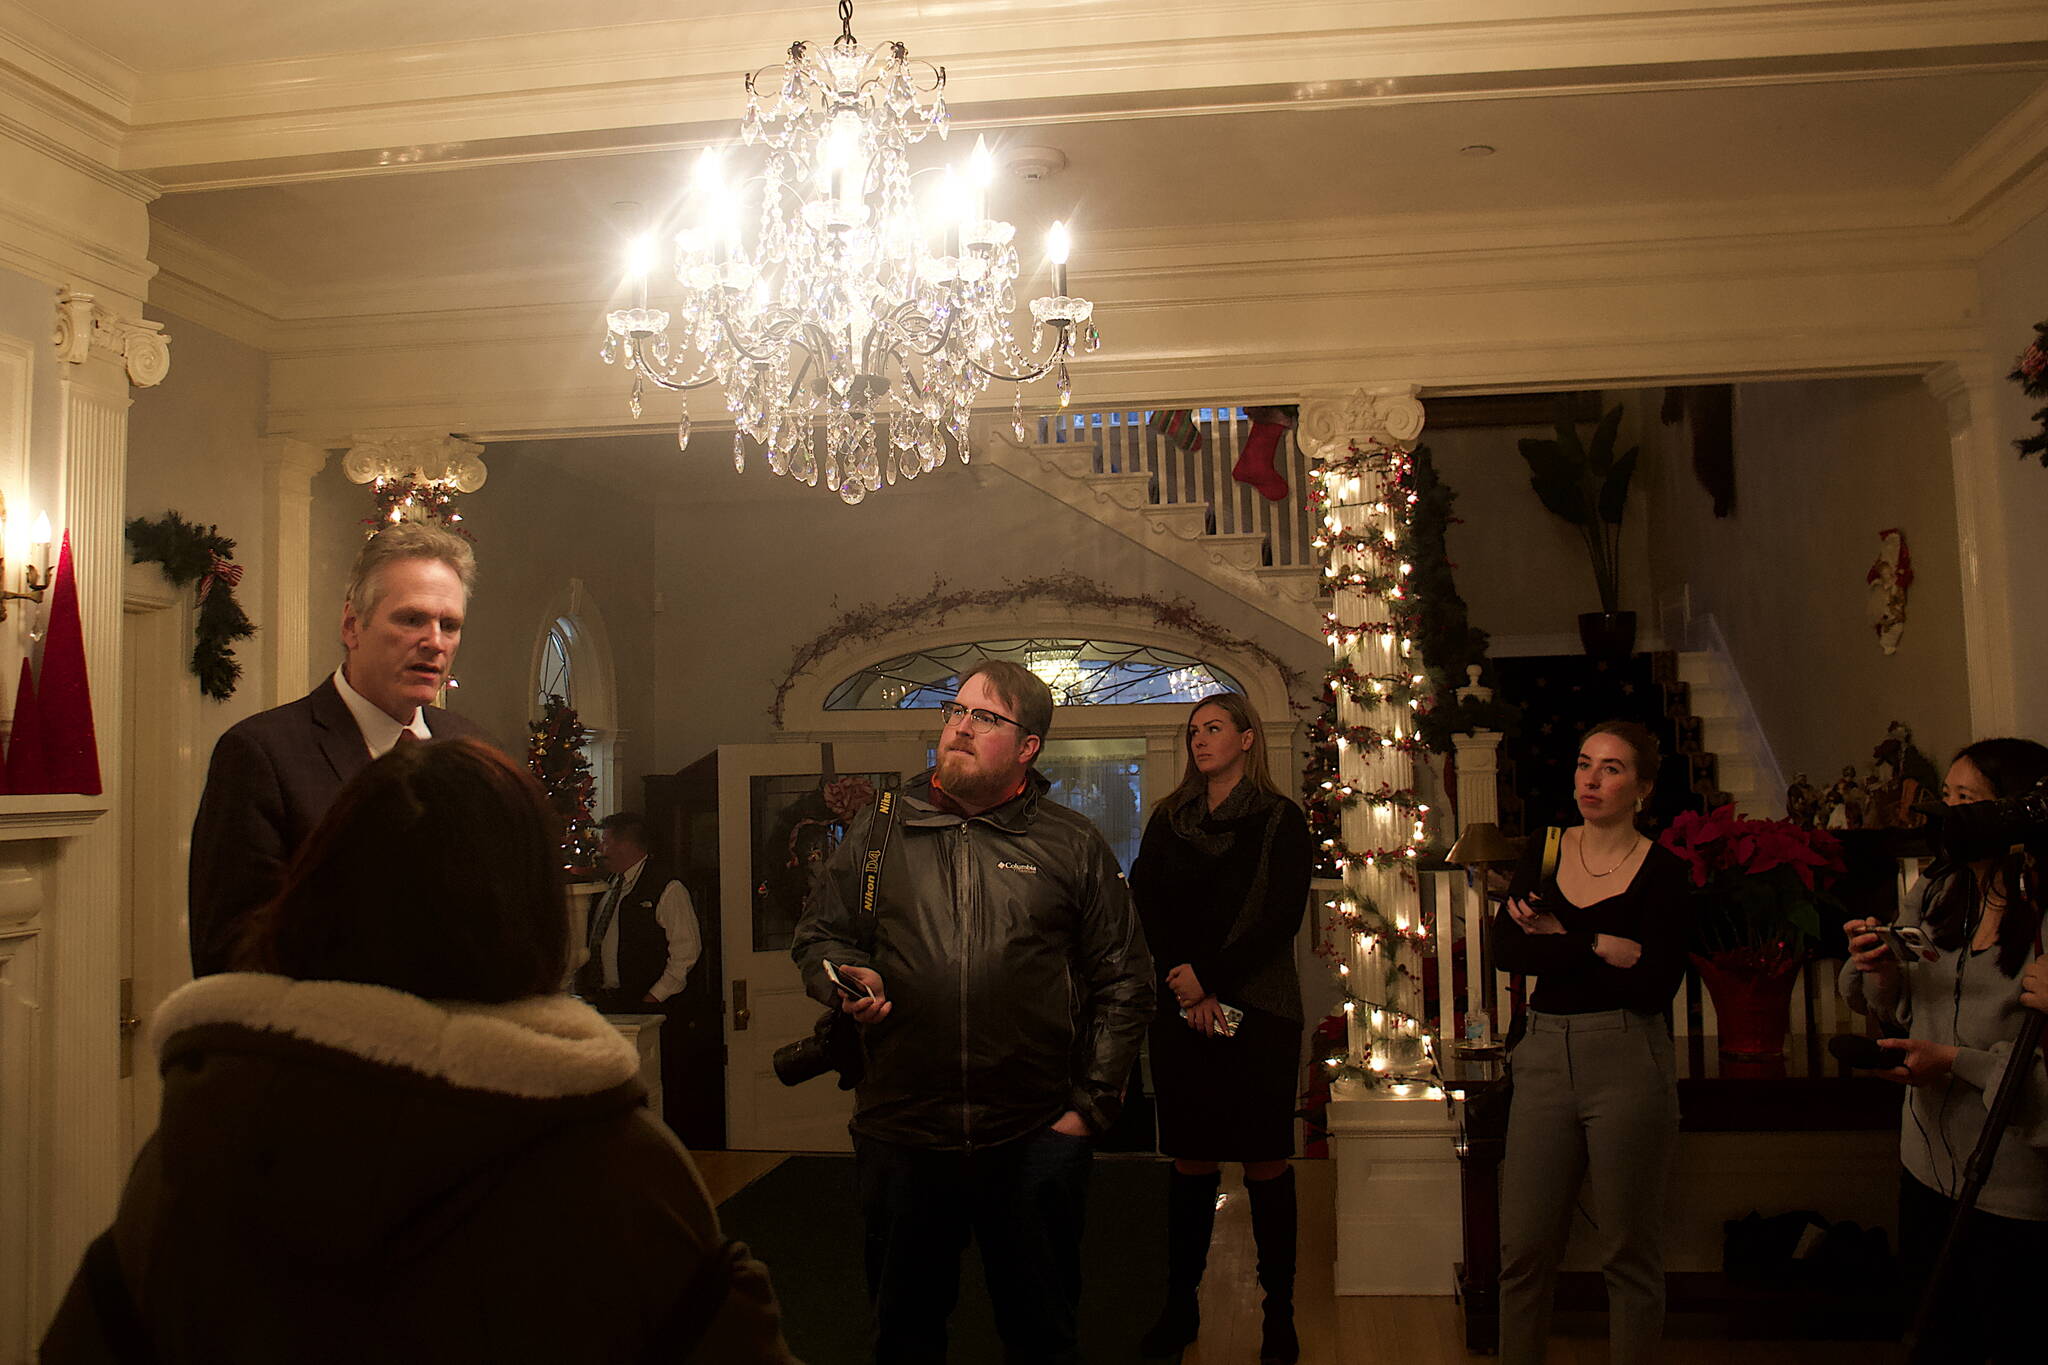 Gov. Mike Dunleavy answers media questions about his proposed budget for next year and the upcoming legislative session shortly before the annual holiday open house at the governor’s mansion on Tuesday. (Mark Sabbatini / Juneau Empire)